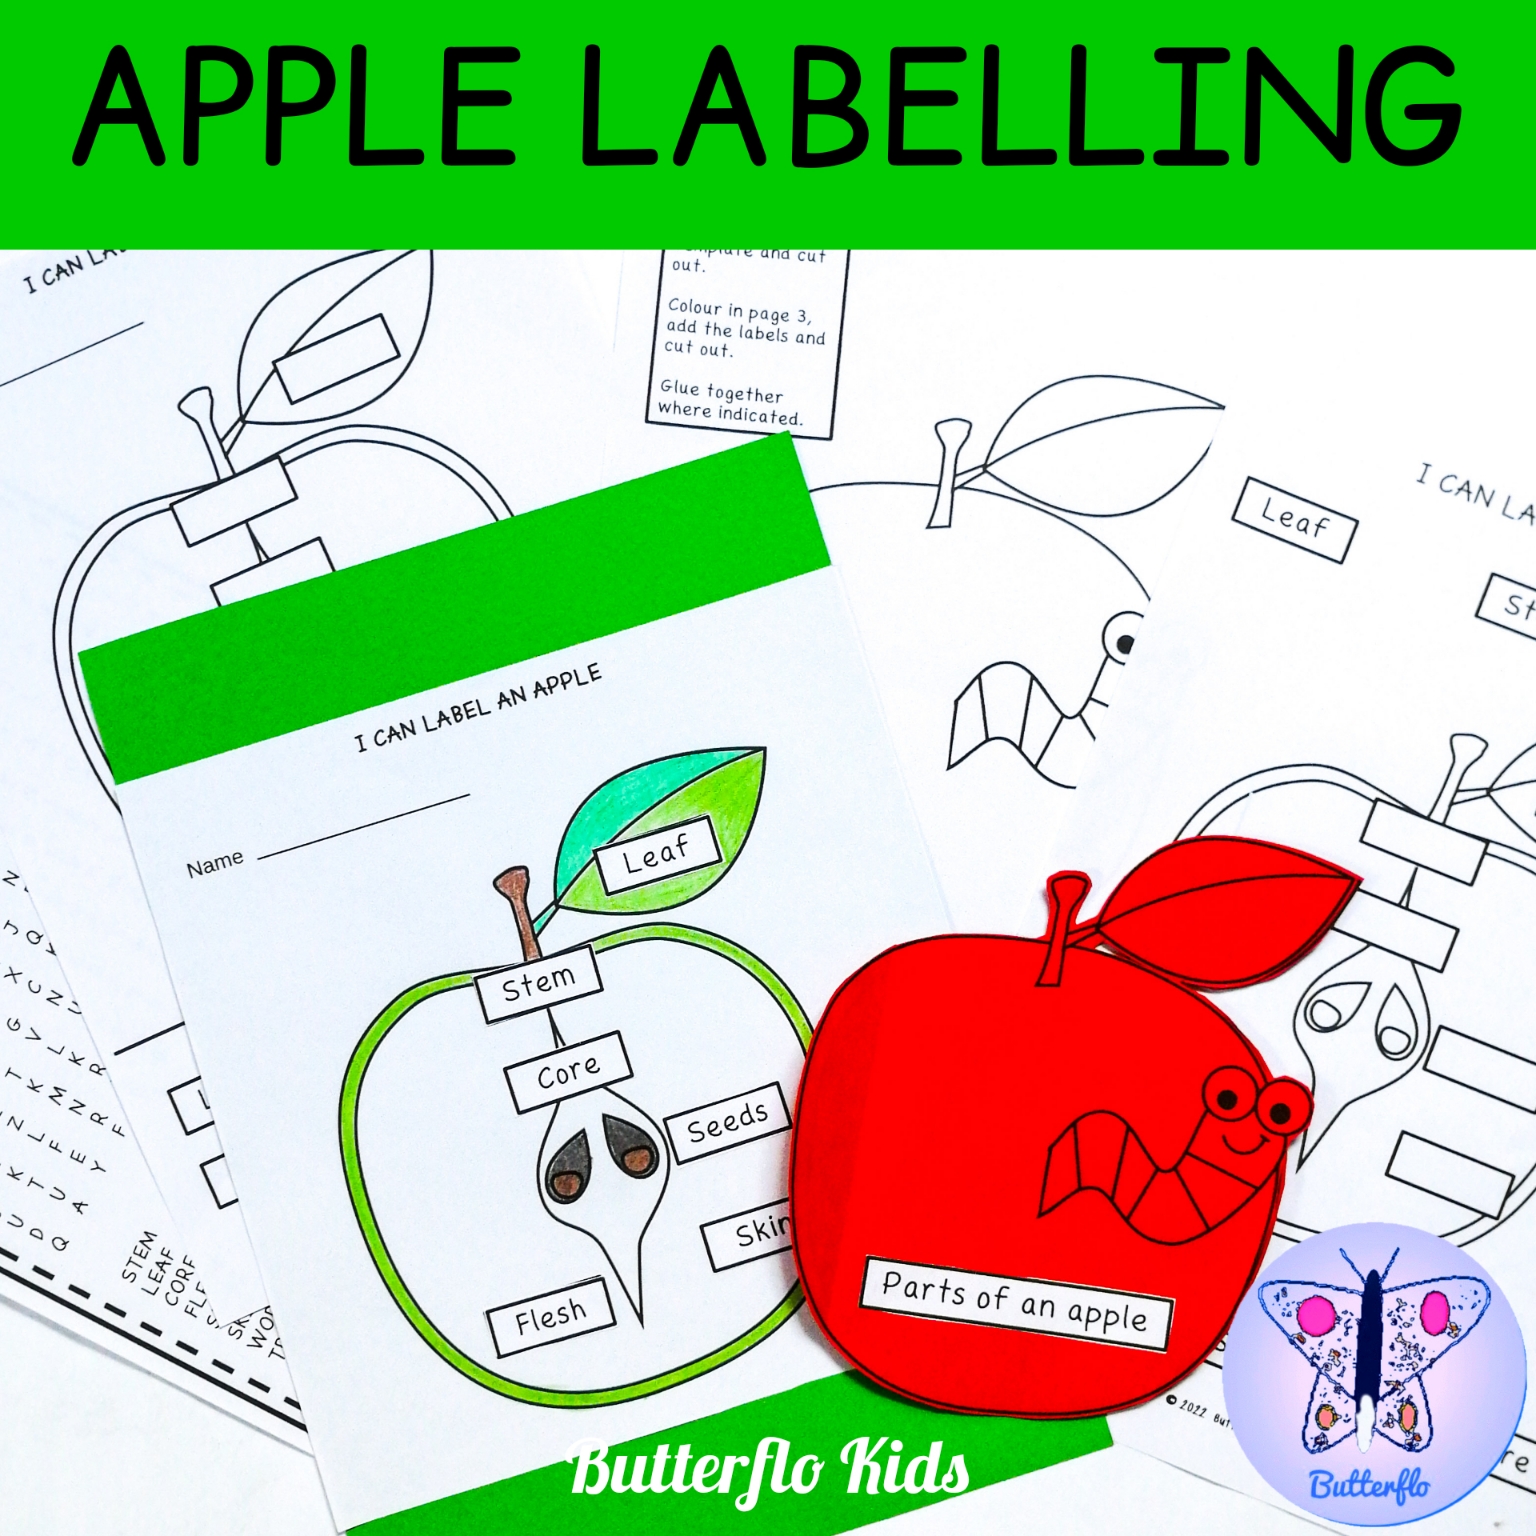 parts of an apple labelling activities